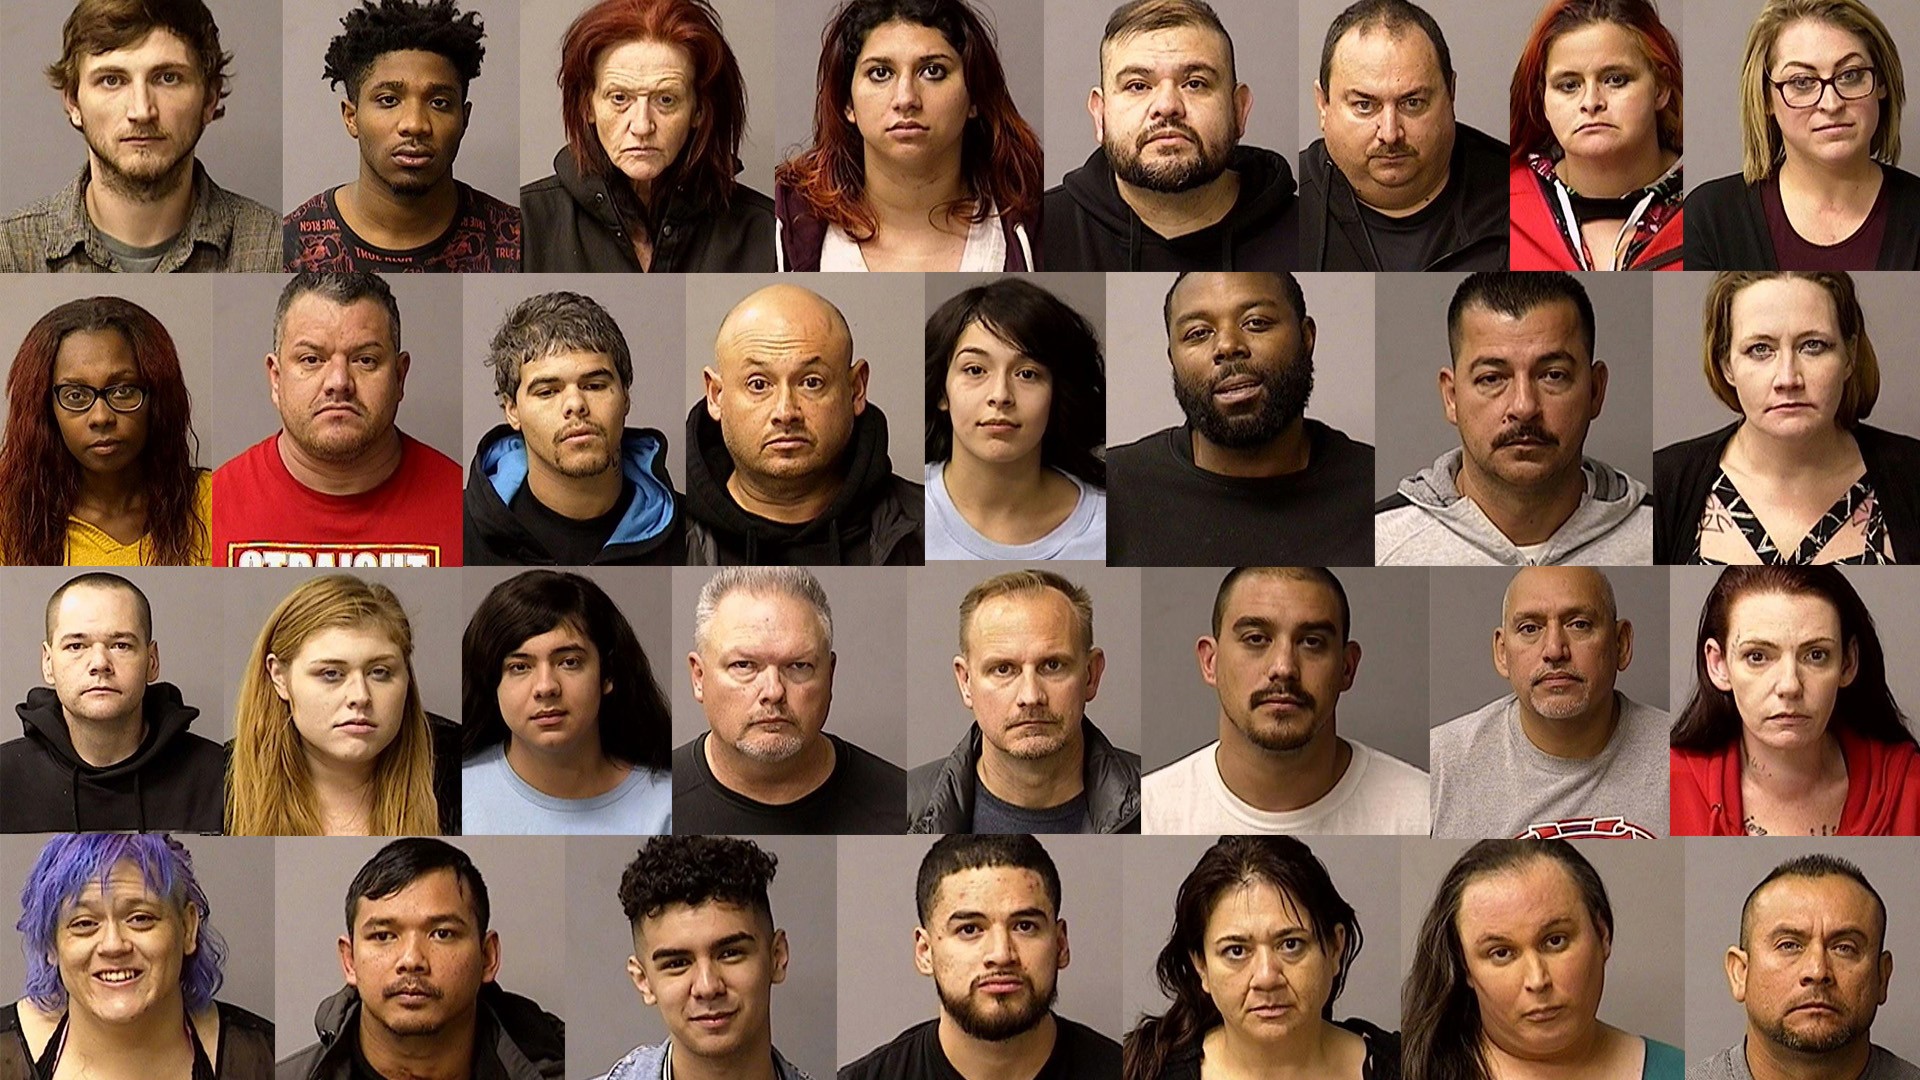 A sweeping, statewide sex trafficking sting lead to dozens of arrests in Stanislaus County and hundreds across California, law enforcement officials confirmed.